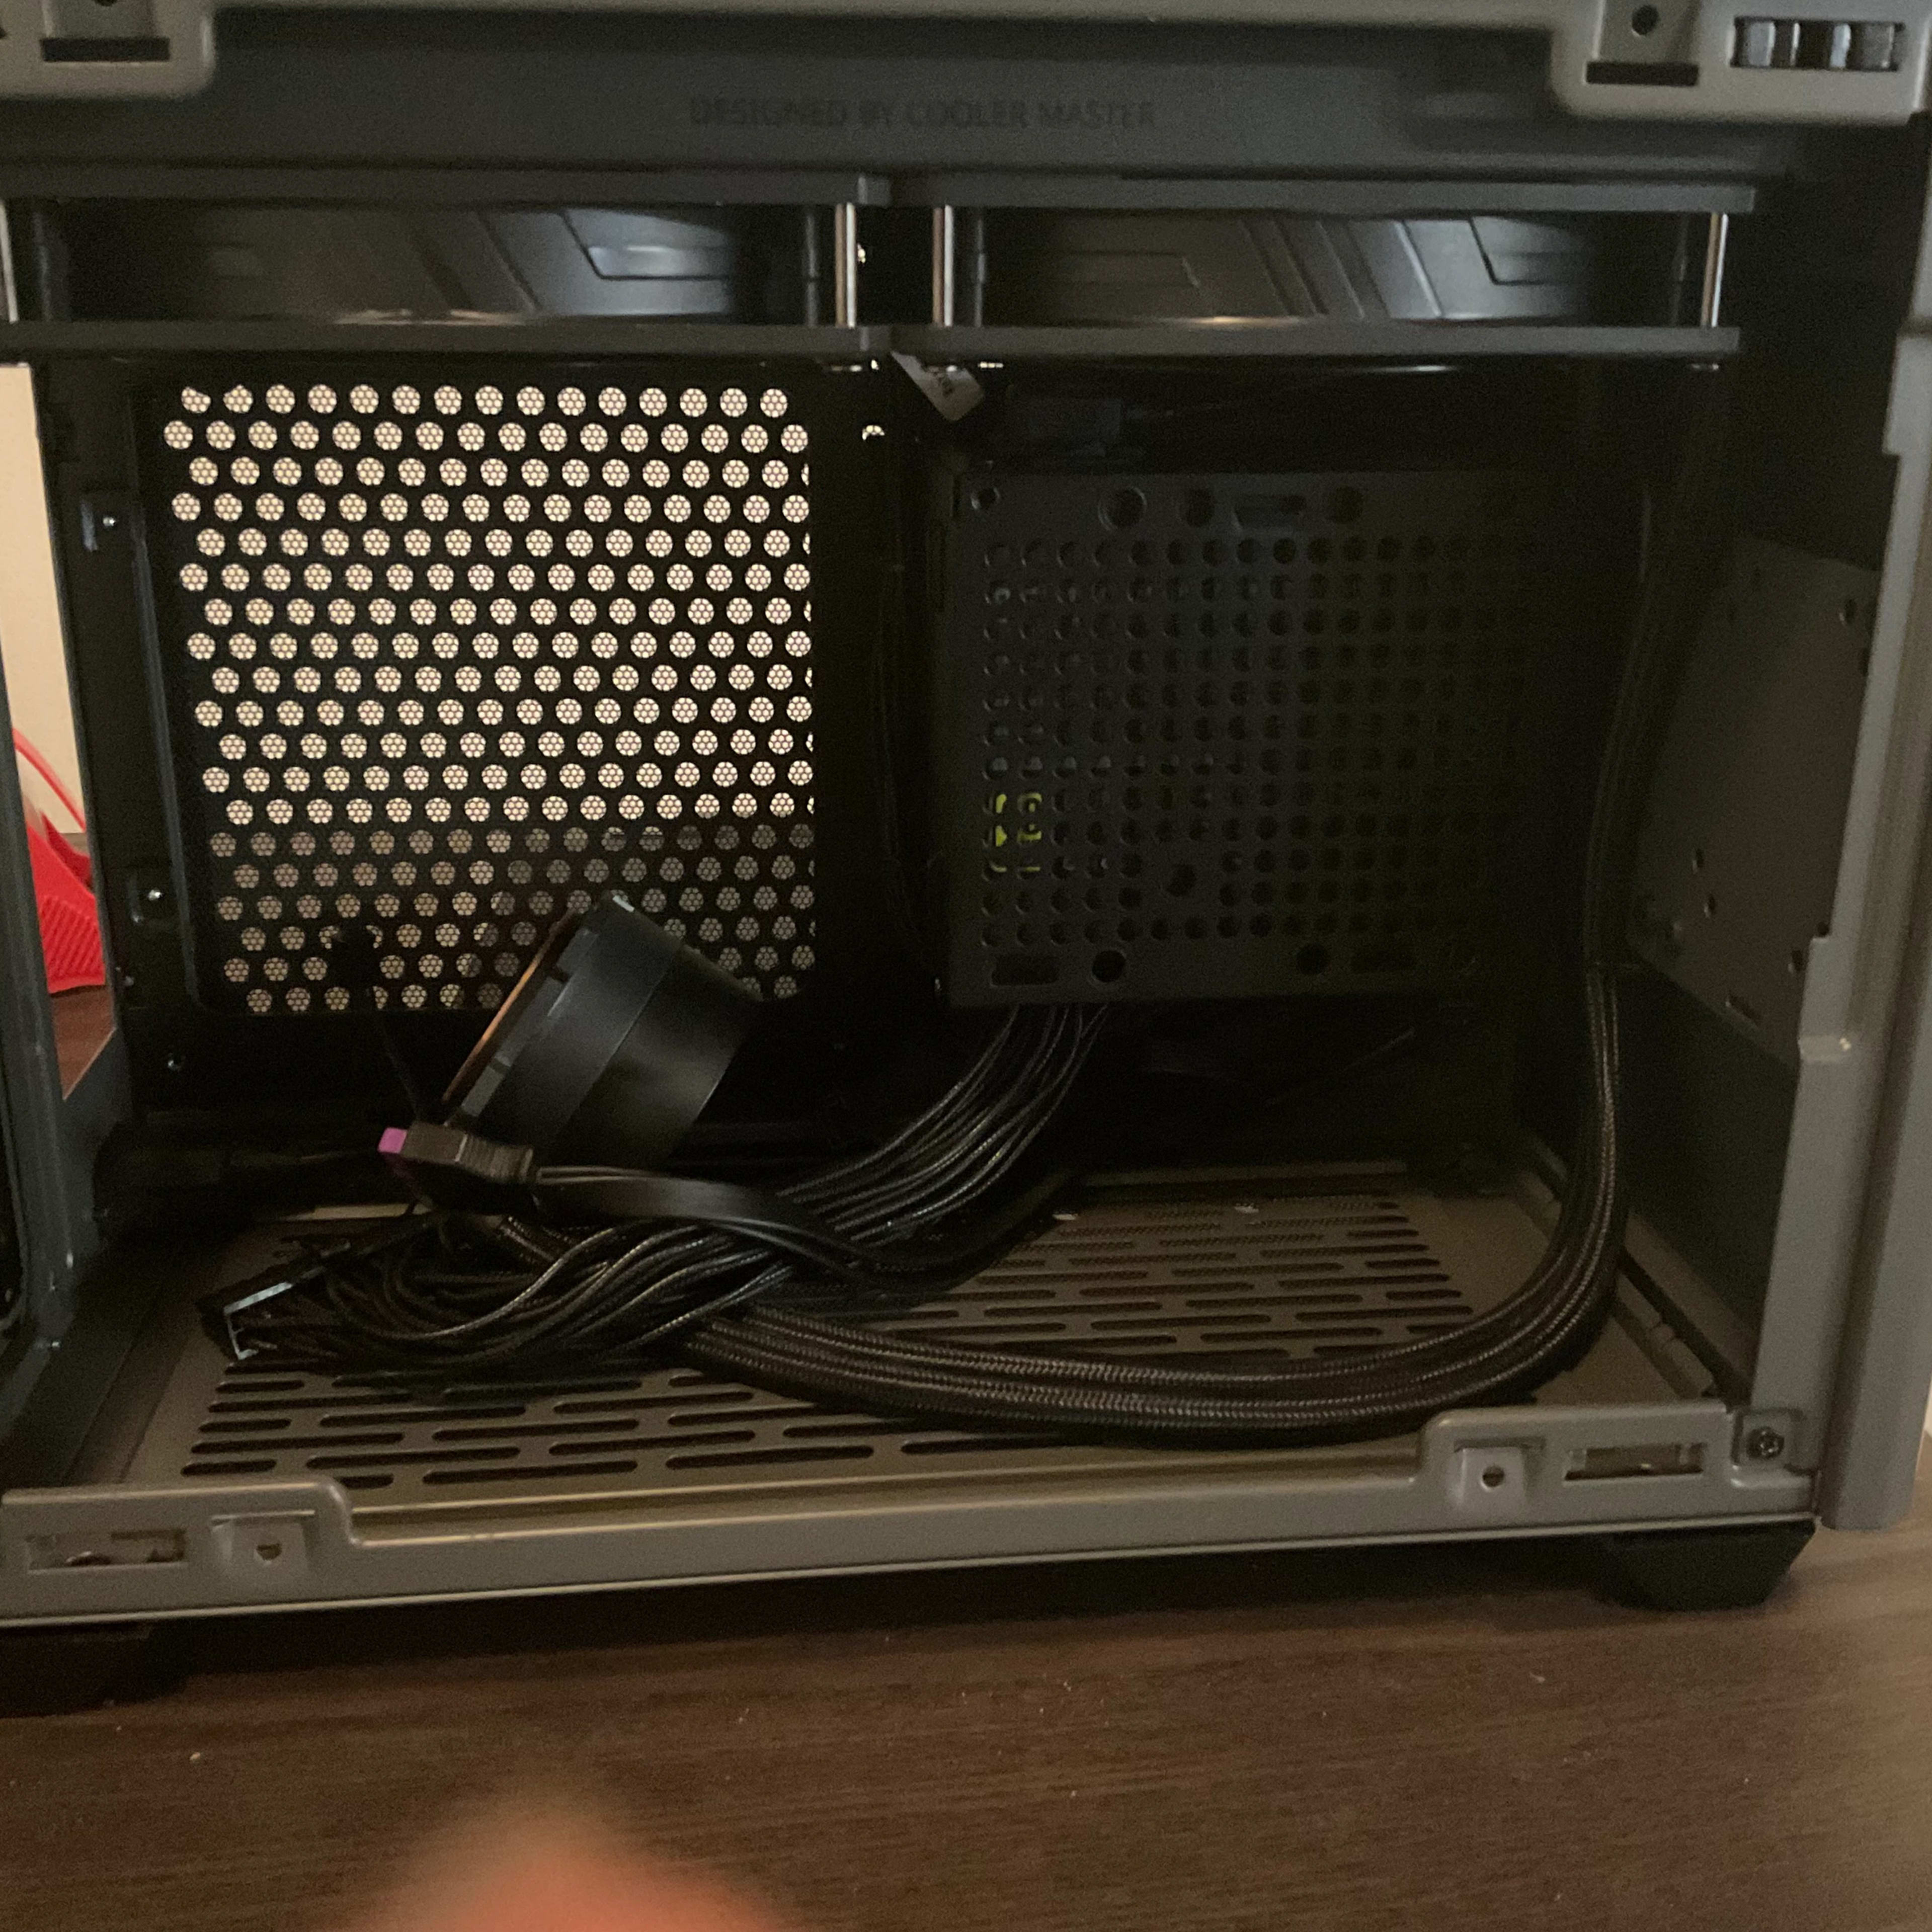 On Sale! Used Cooler Master NR200P Max SFF Case